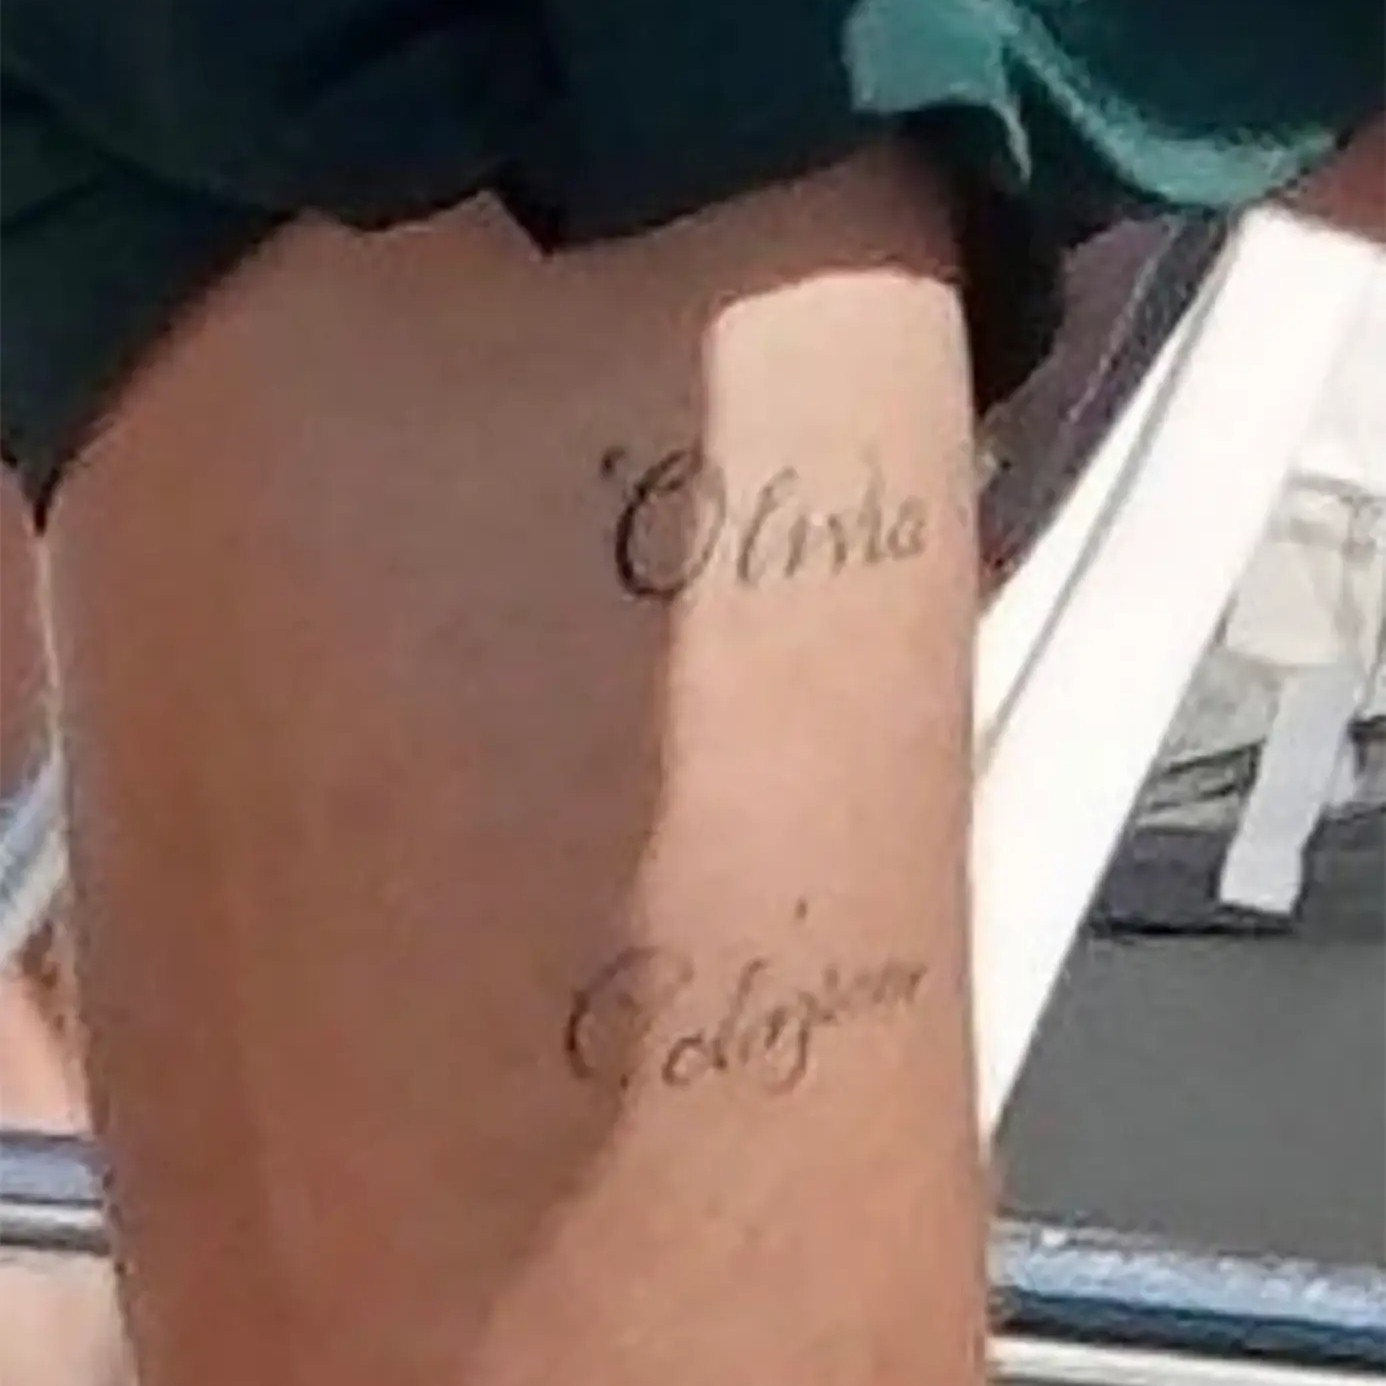 The Elvish tattoo meaning 'nine' that Viggo Mortensen (and co-stars) got  after filming 